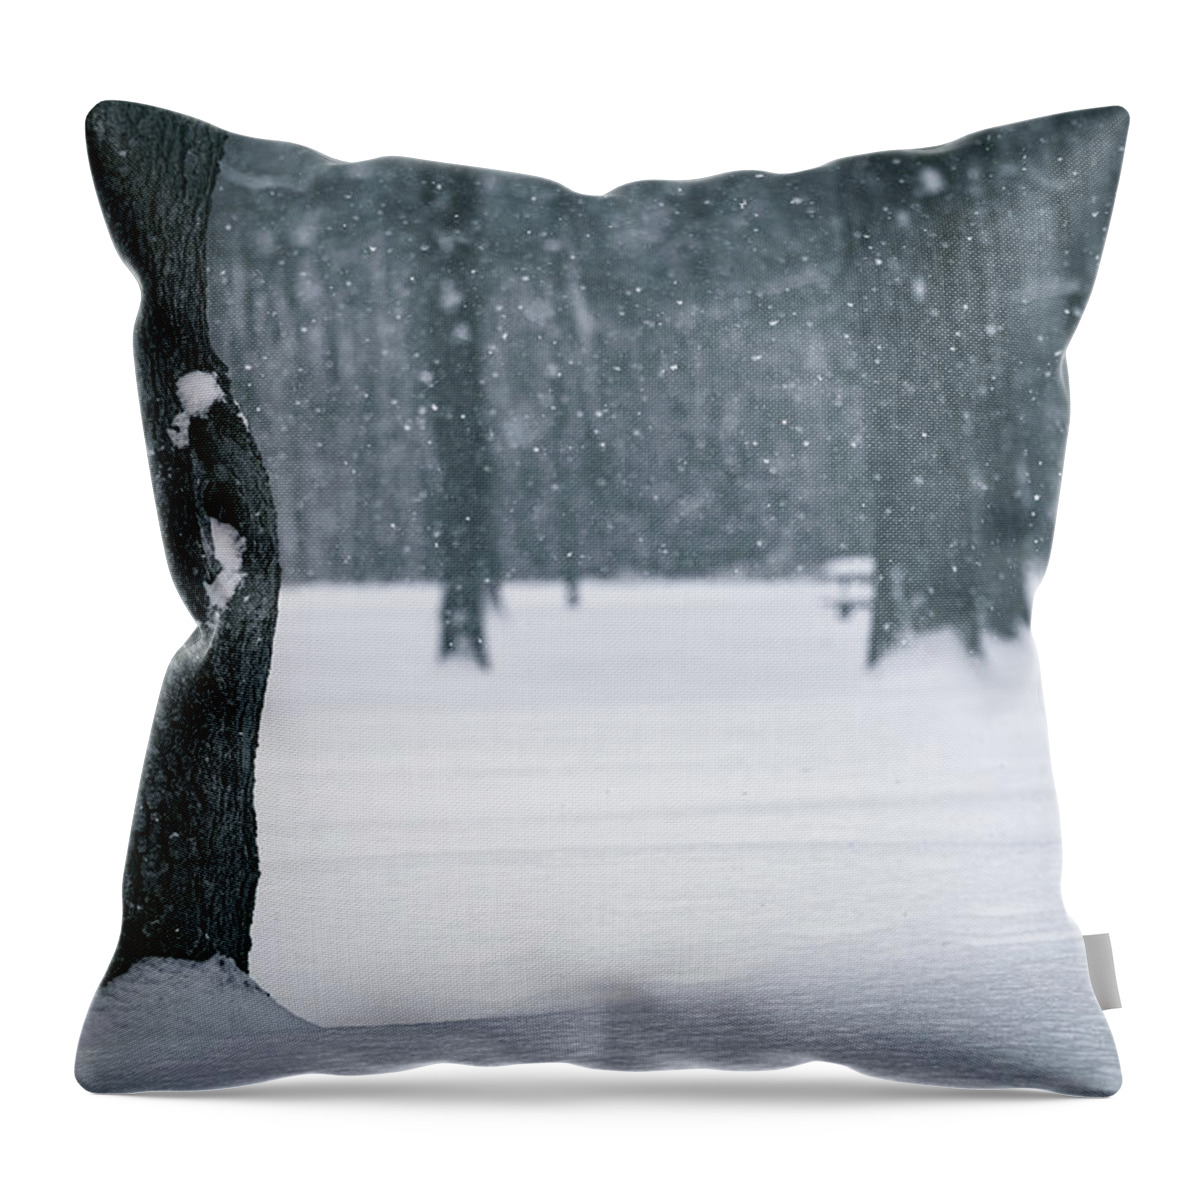 Winter Forest Floor Throw Pillow featuring the photograph Winter Forest Floor by Dan Sproul